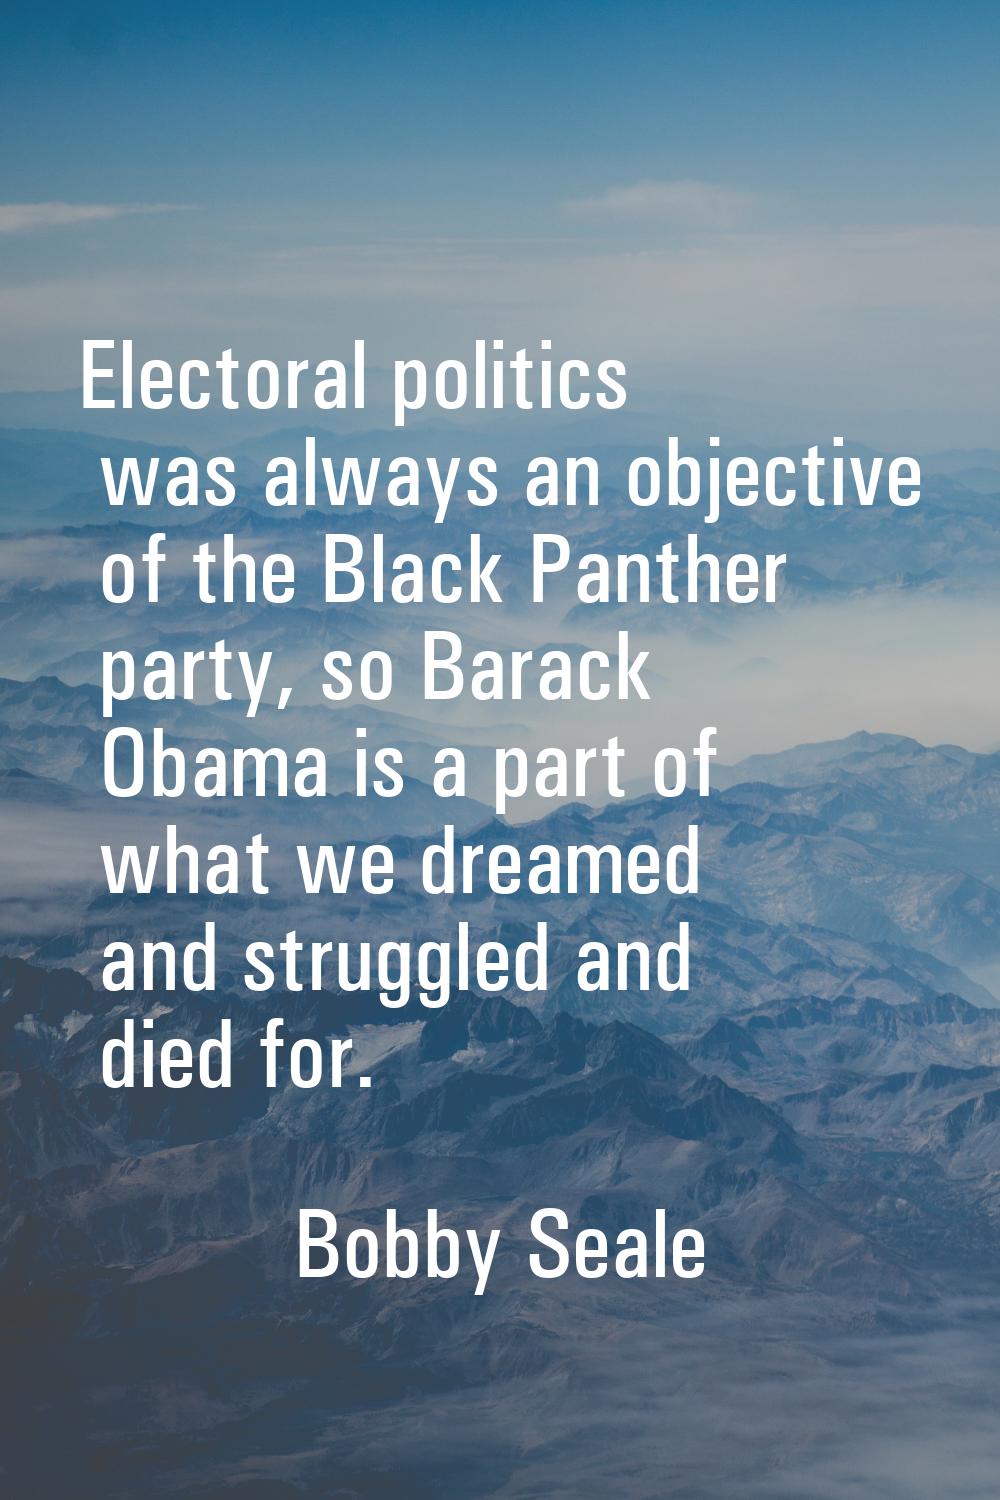 Electoral politics was always an objective of the Black Panther party, so Barack Obama is a part of